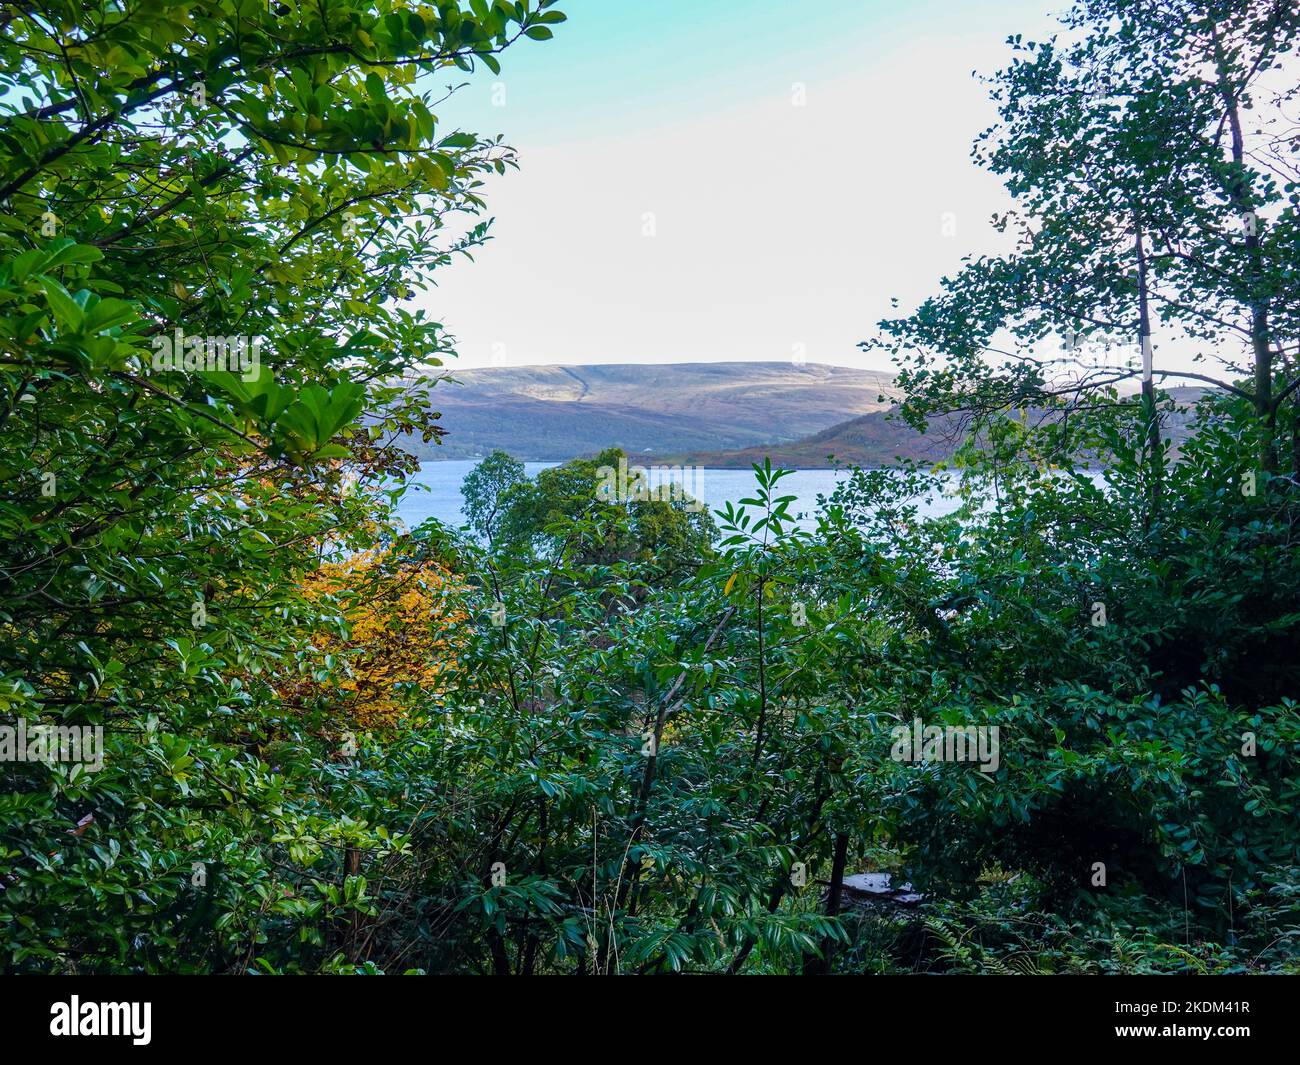 View of the loch and surrounding hills through a forest overlook near Tignabruaich on the Cowal Peninsula, Argyll and Bute, Scotland, UK. Stock Photo